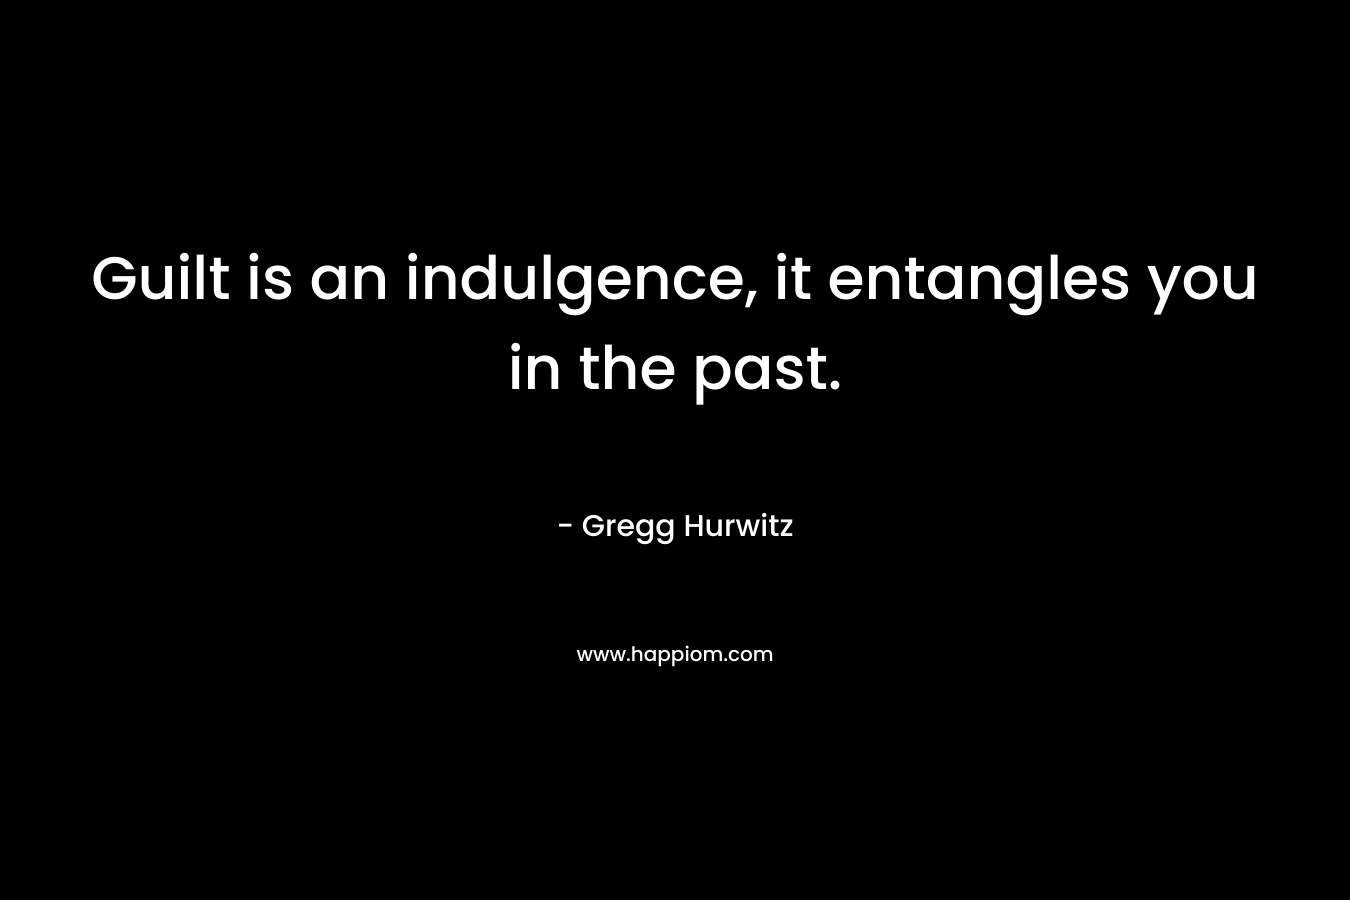 Guilt is an indulgence, it entangles you in the past. – Gregg Hurwitz